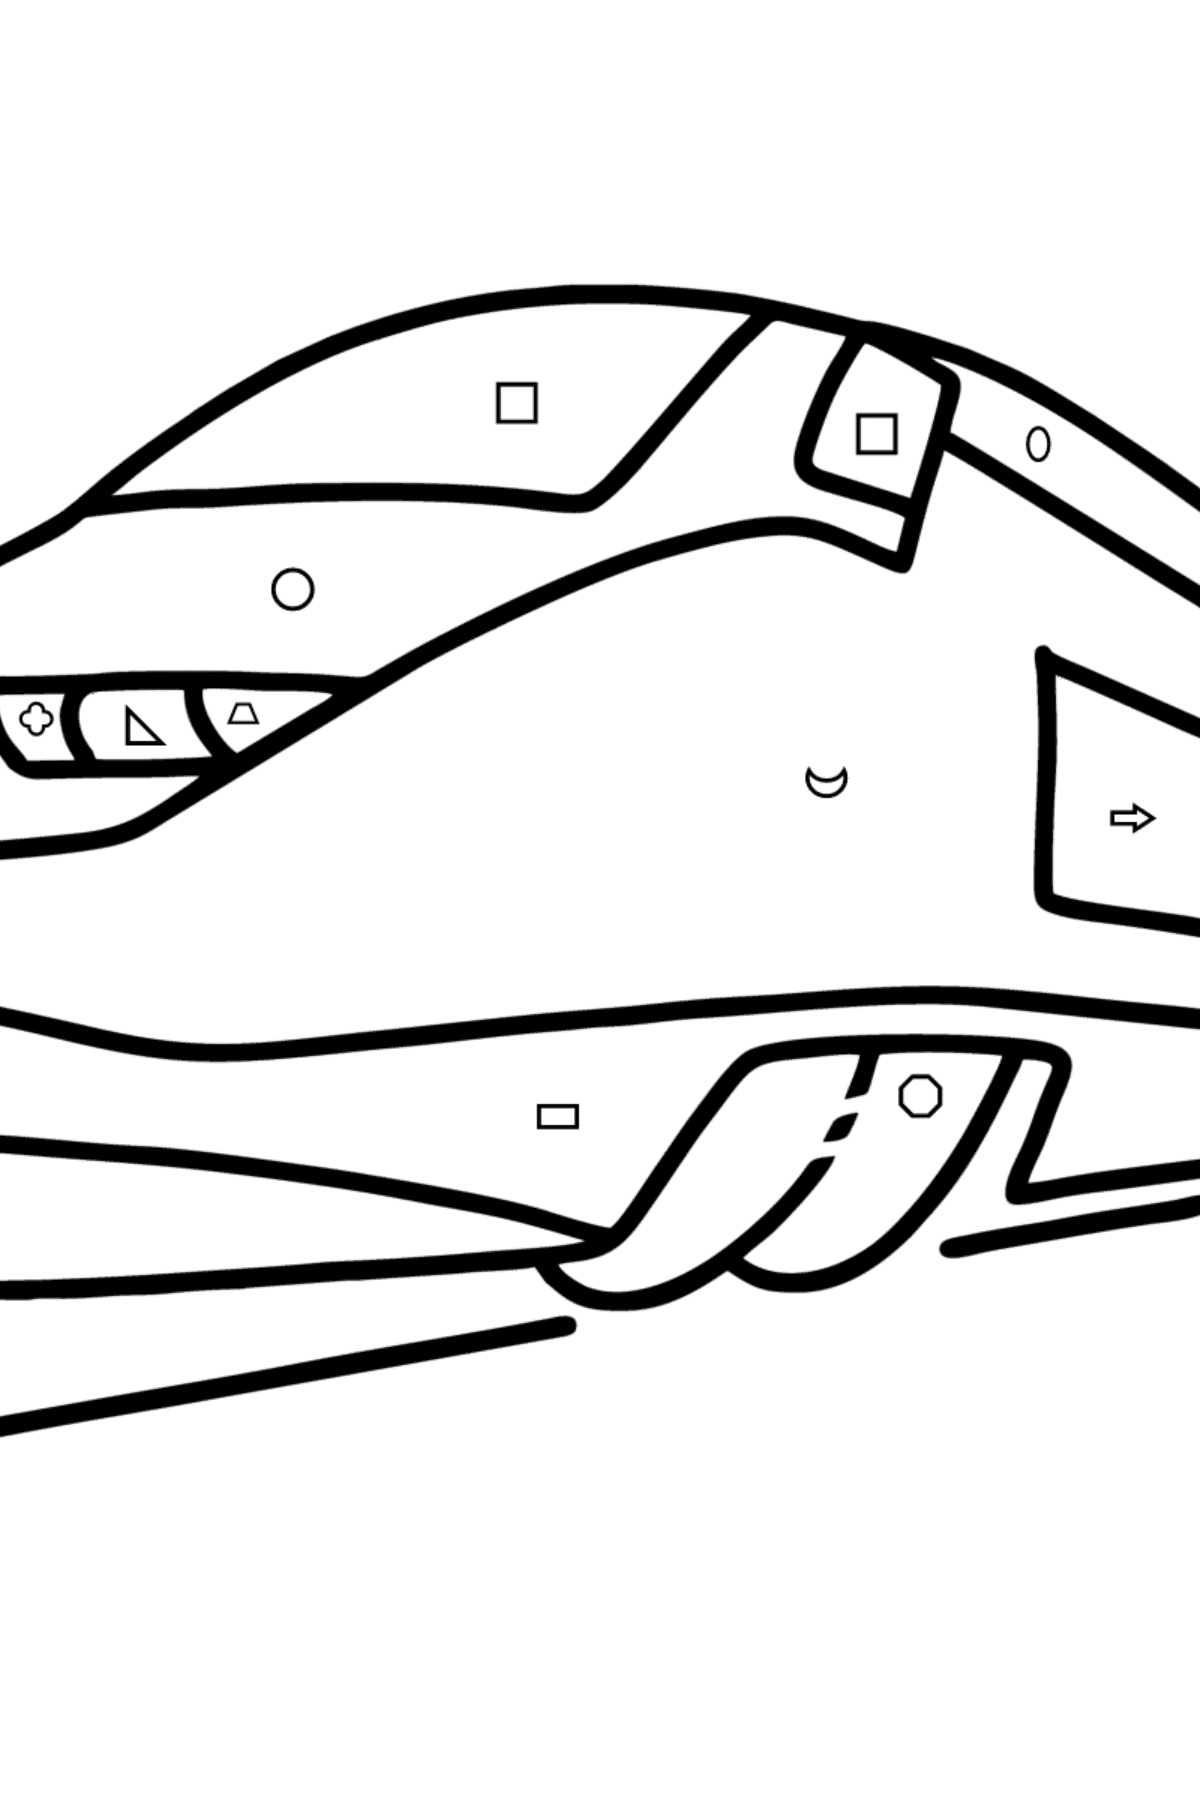 Train coloring page for kids - Coloring by Geometric Shapes for Kids